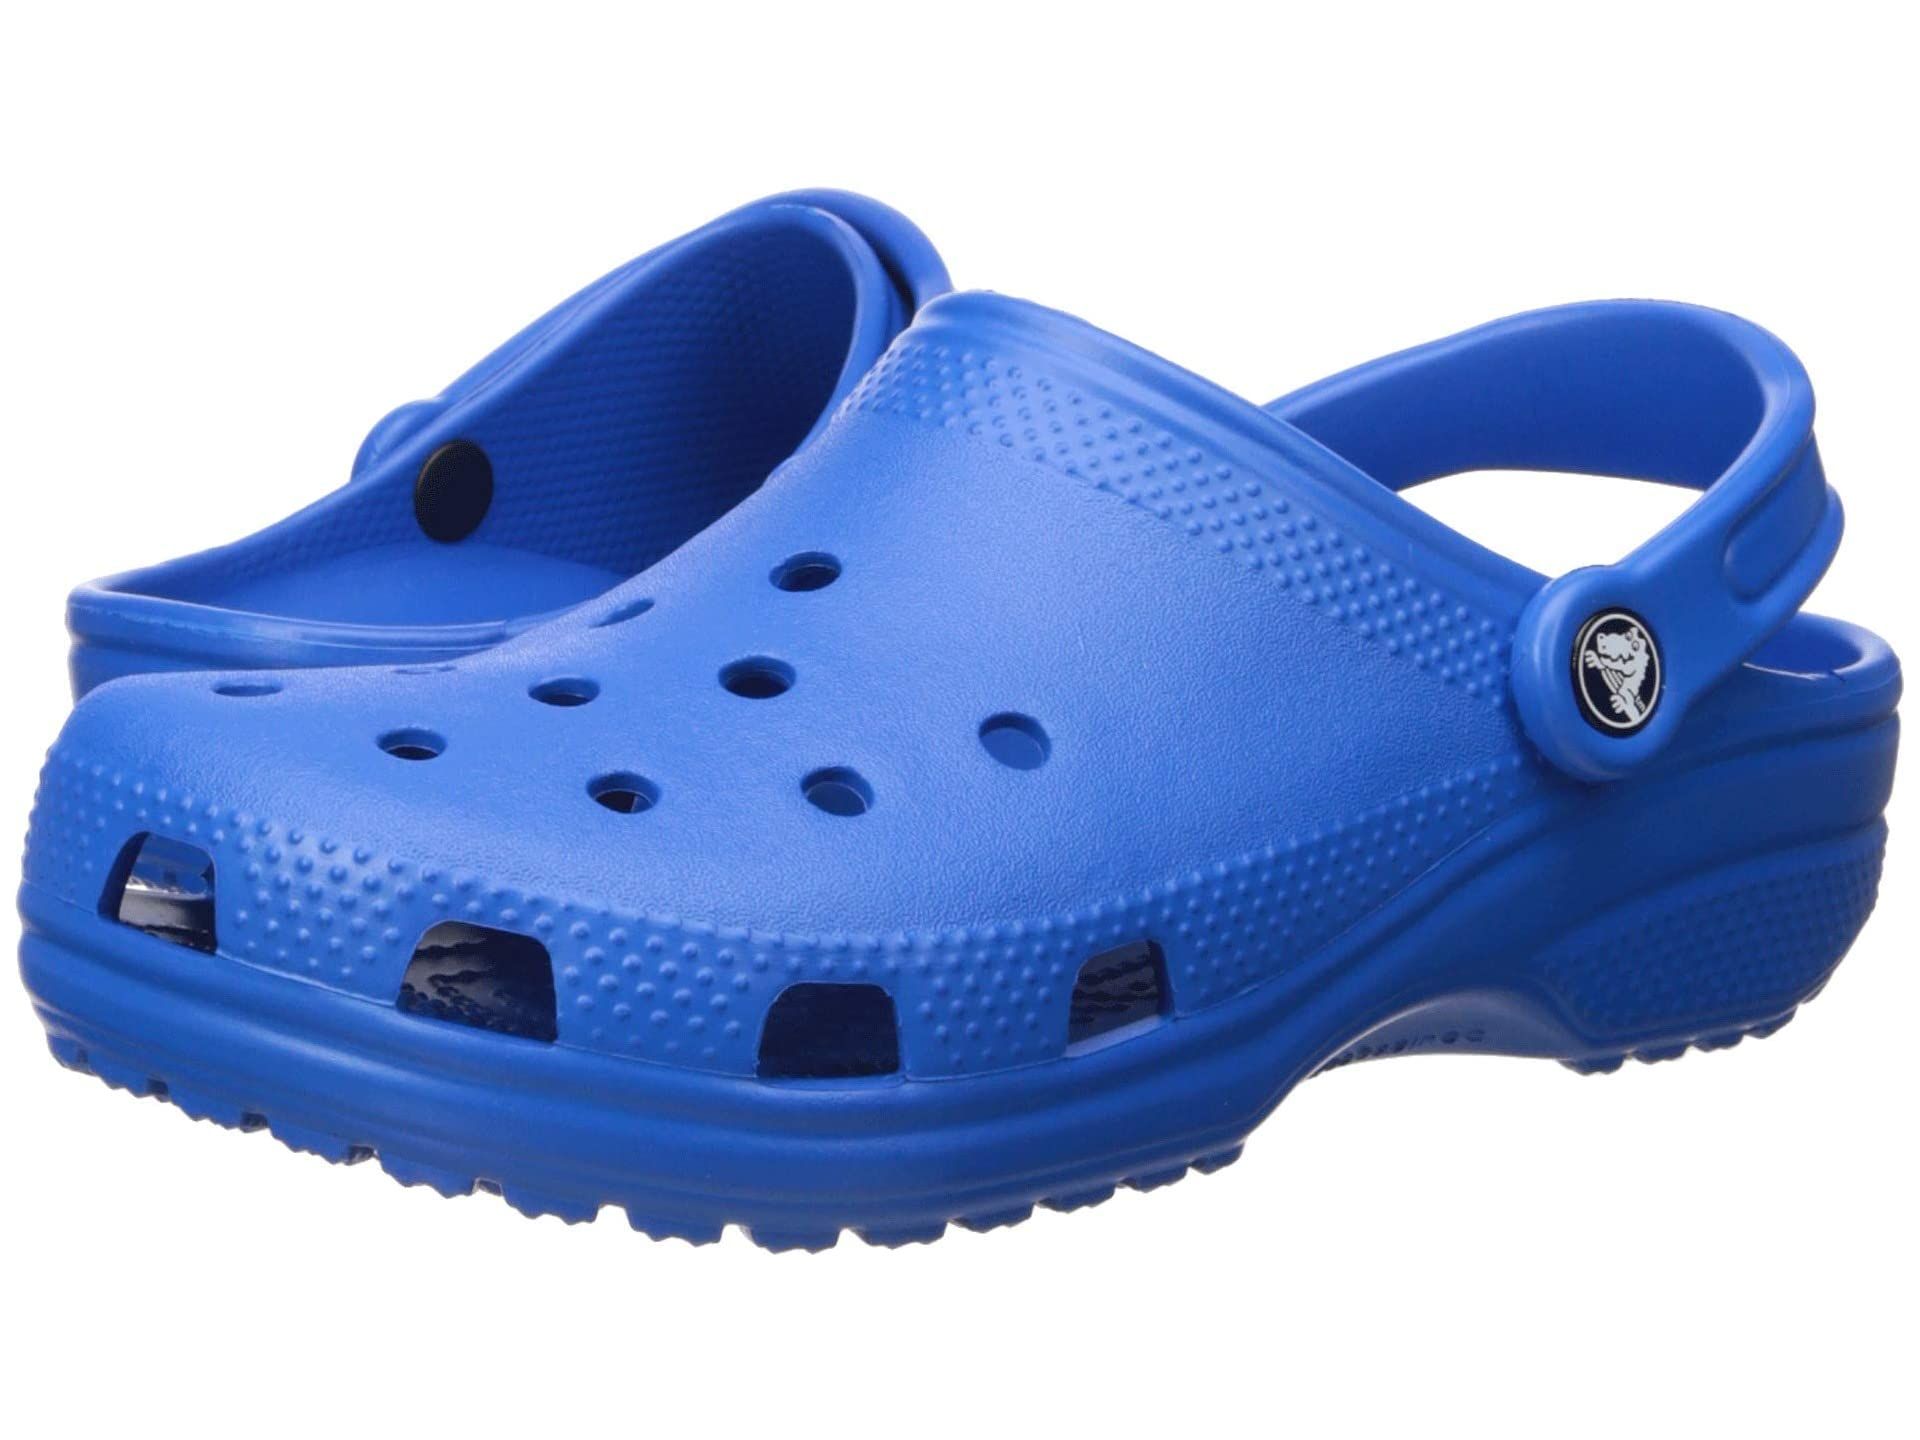 where do they sell crocs shoes